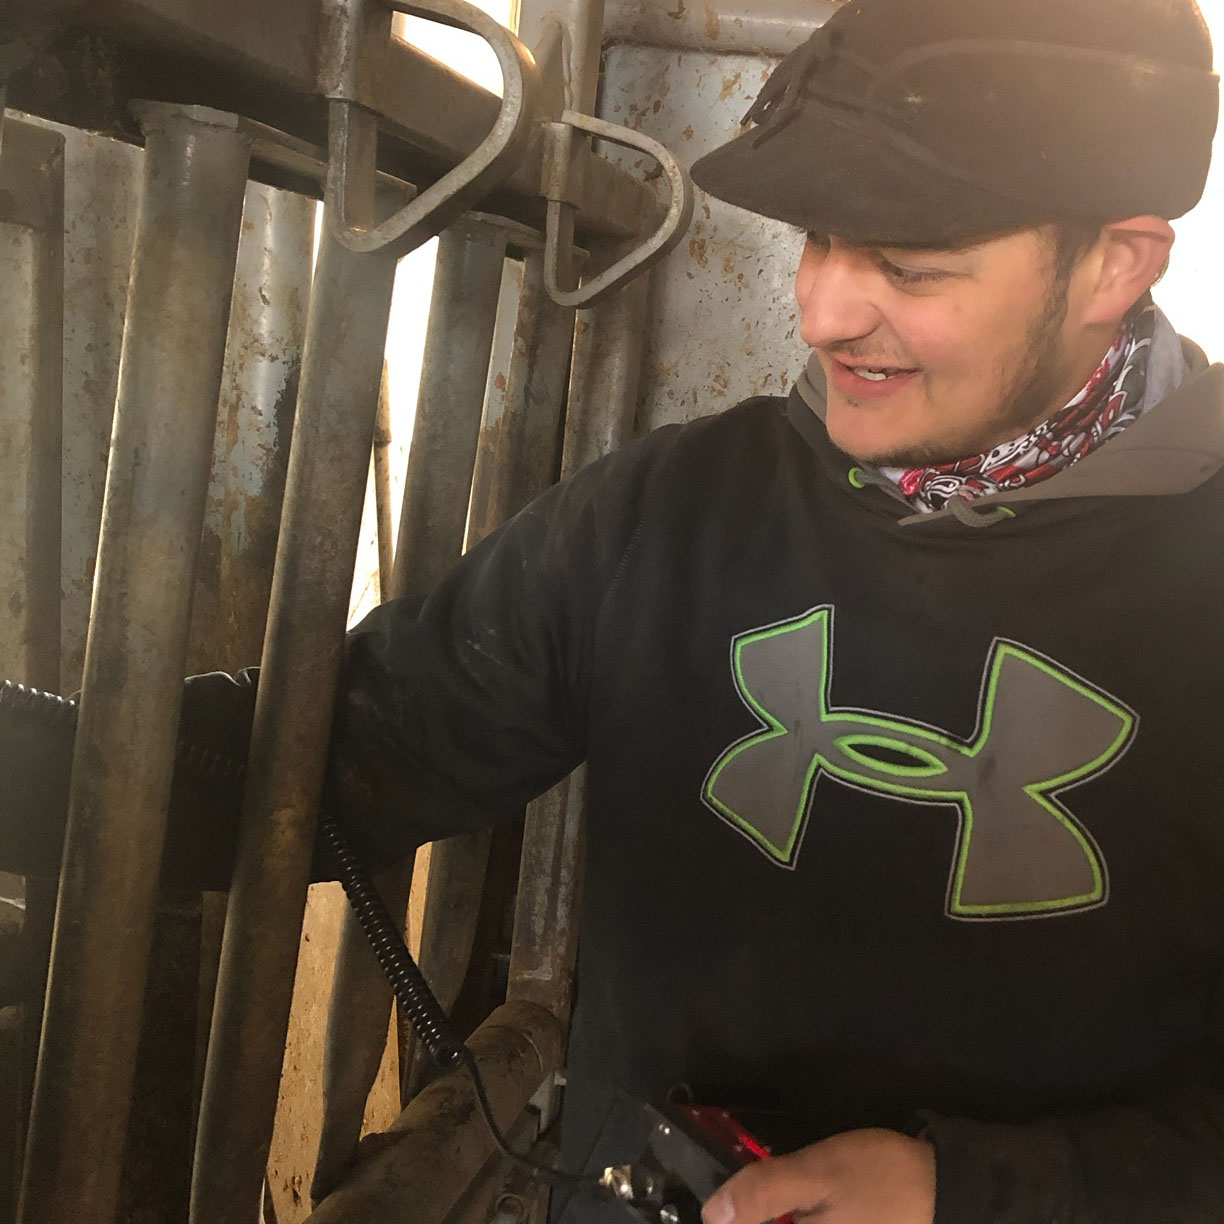 Cj Monheiser of Hershey was named Aggie of the Month for November. Here, he is chuteside processing cattle at the NCTA Farm. (Photo by D. Wellman/NCTA student)